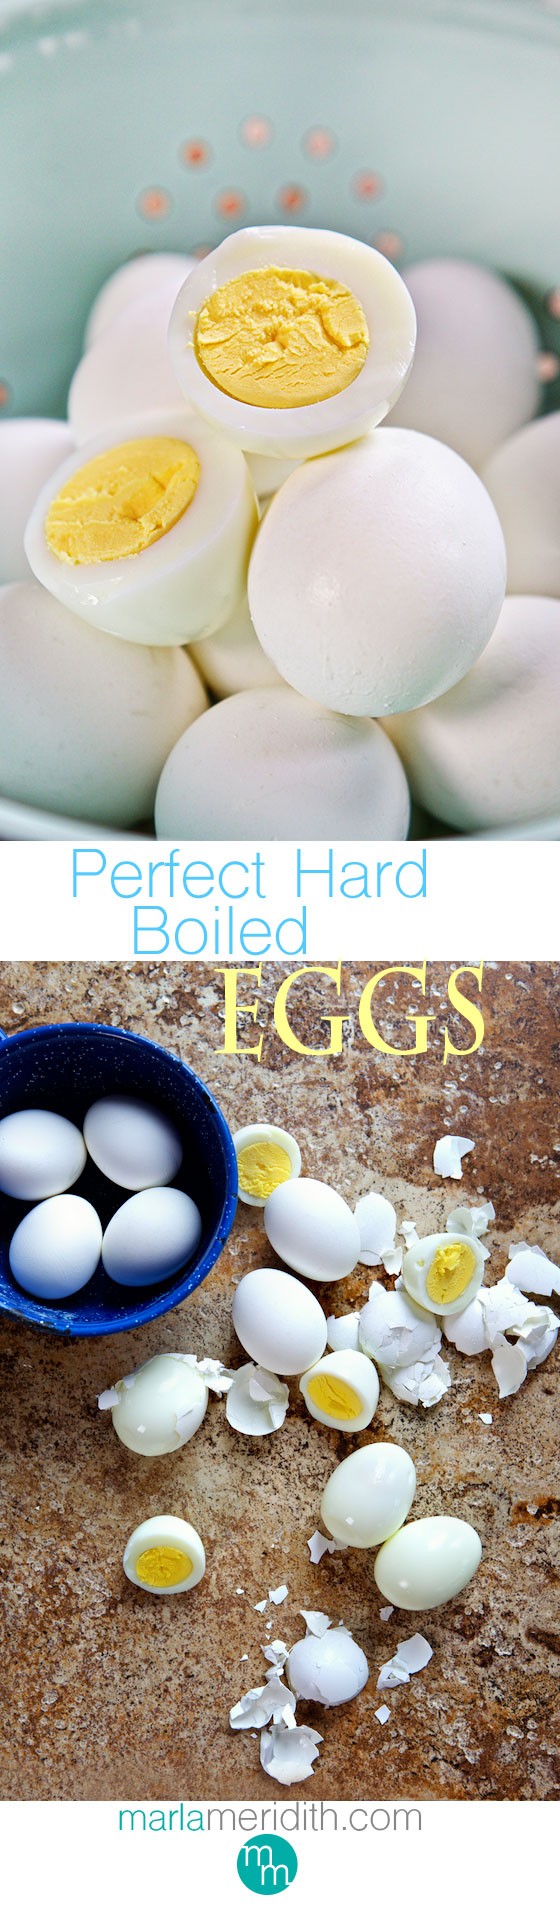 How to: Perfect Hard Boiled Eggs | MarlaMeridith.com